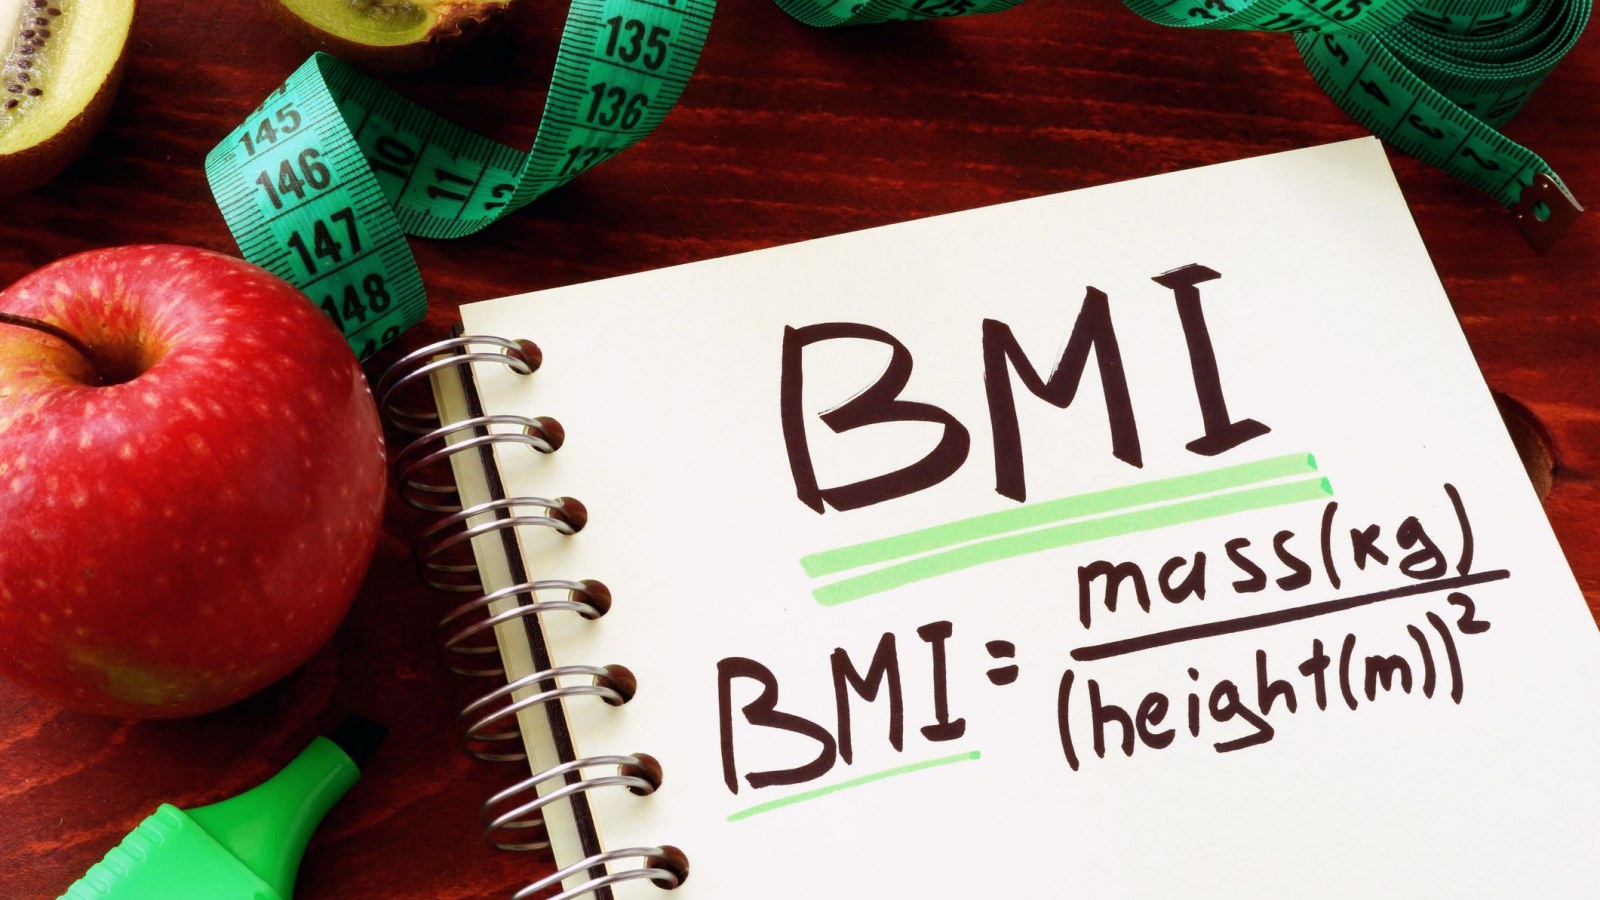 Having This Bmi Will Protect Against Cancer And Heart Disease Deaths